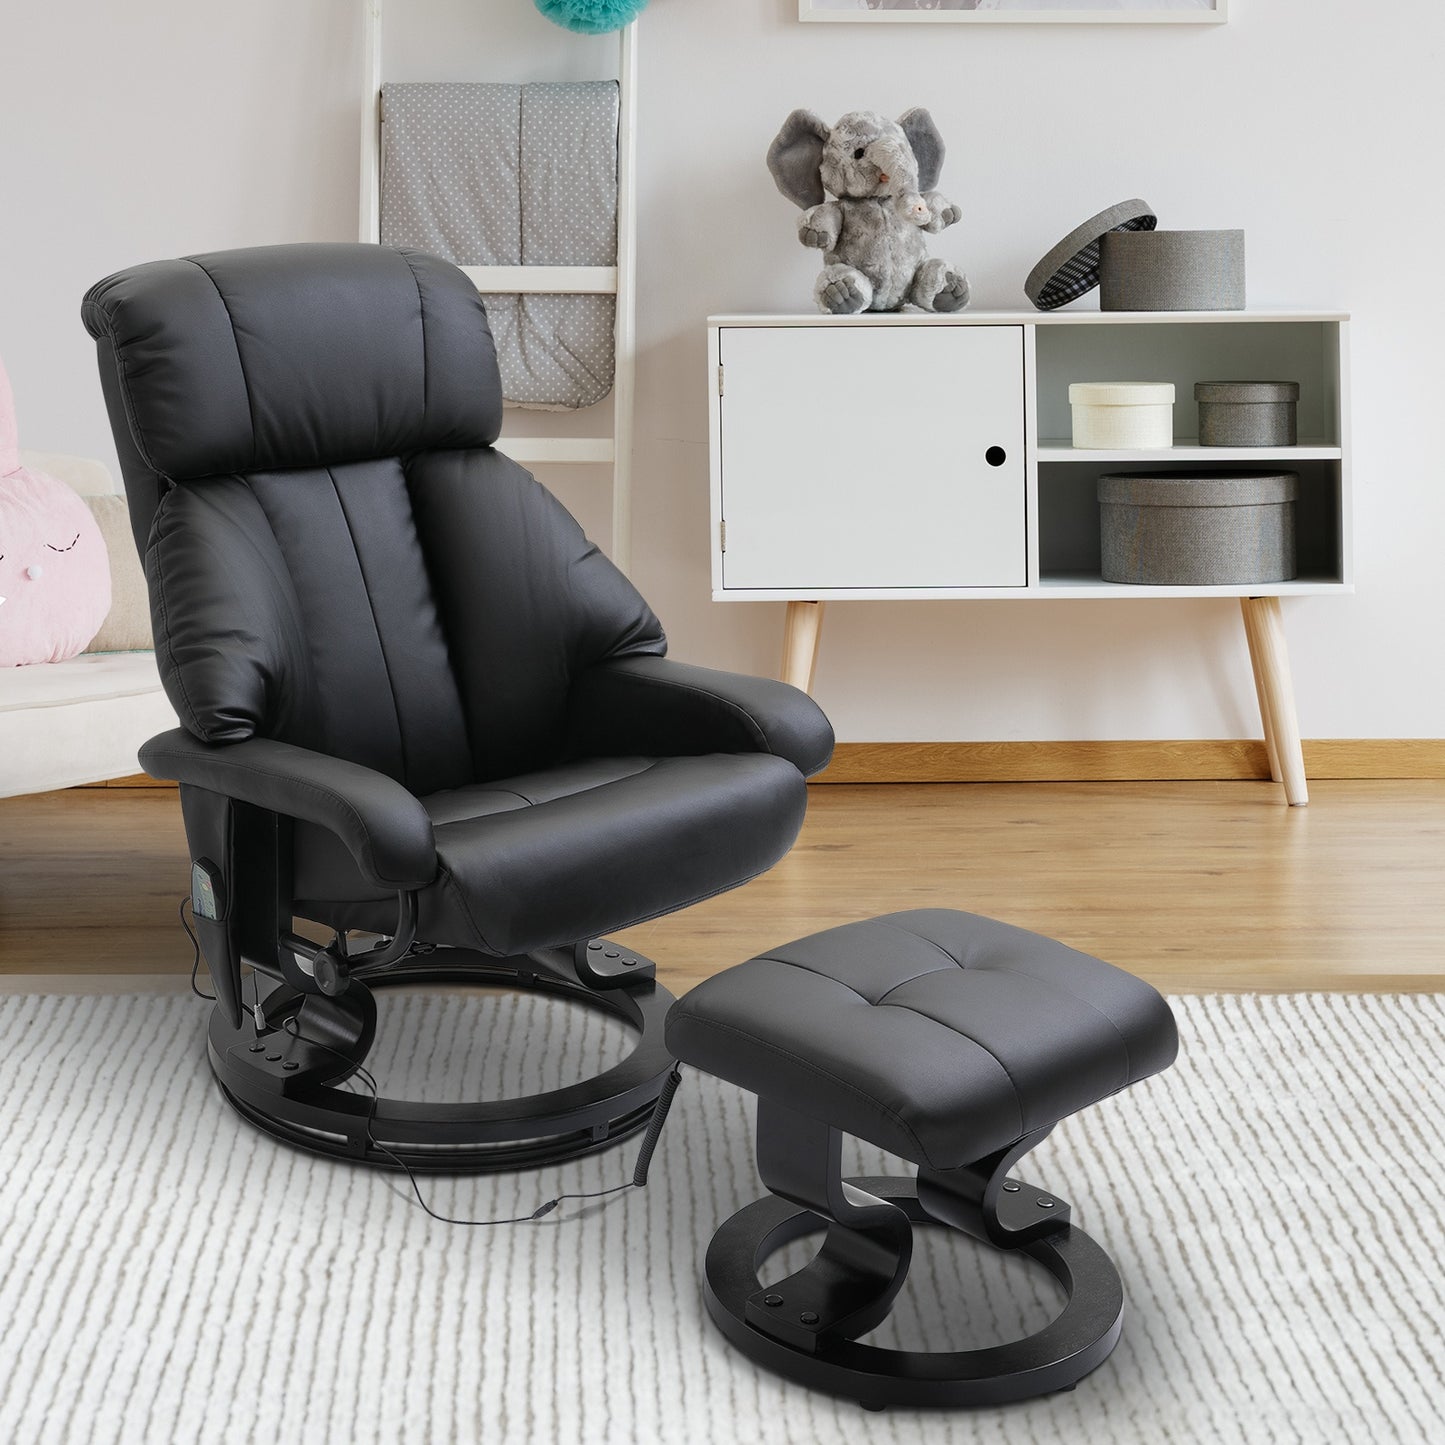 HOMCOM Recliner Chair Electric Massage Chair W/Foot Stool 10-Point Massage Couch-Black